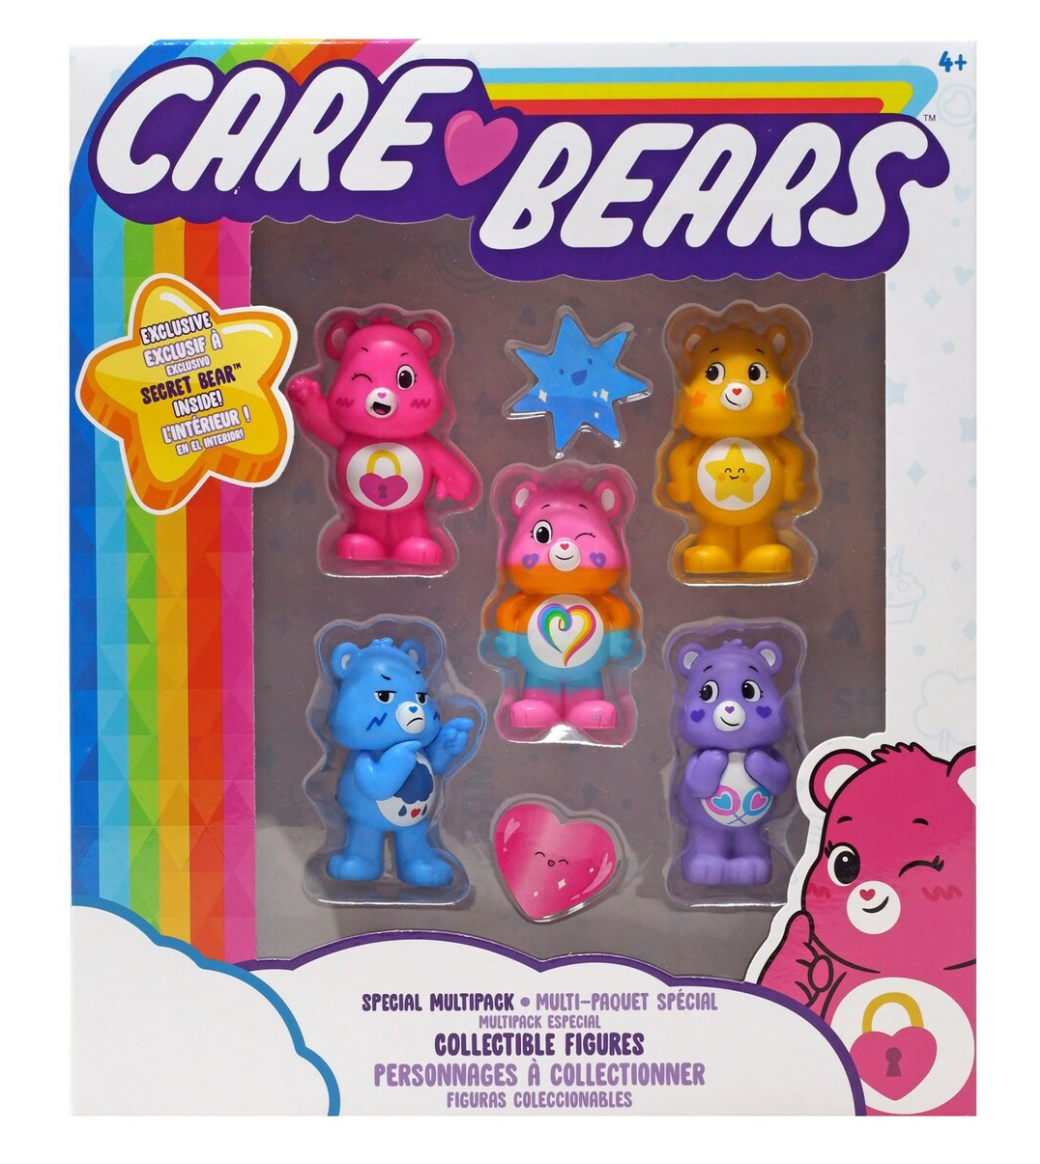 CARE BEARS SPECIAL MULTIPACK